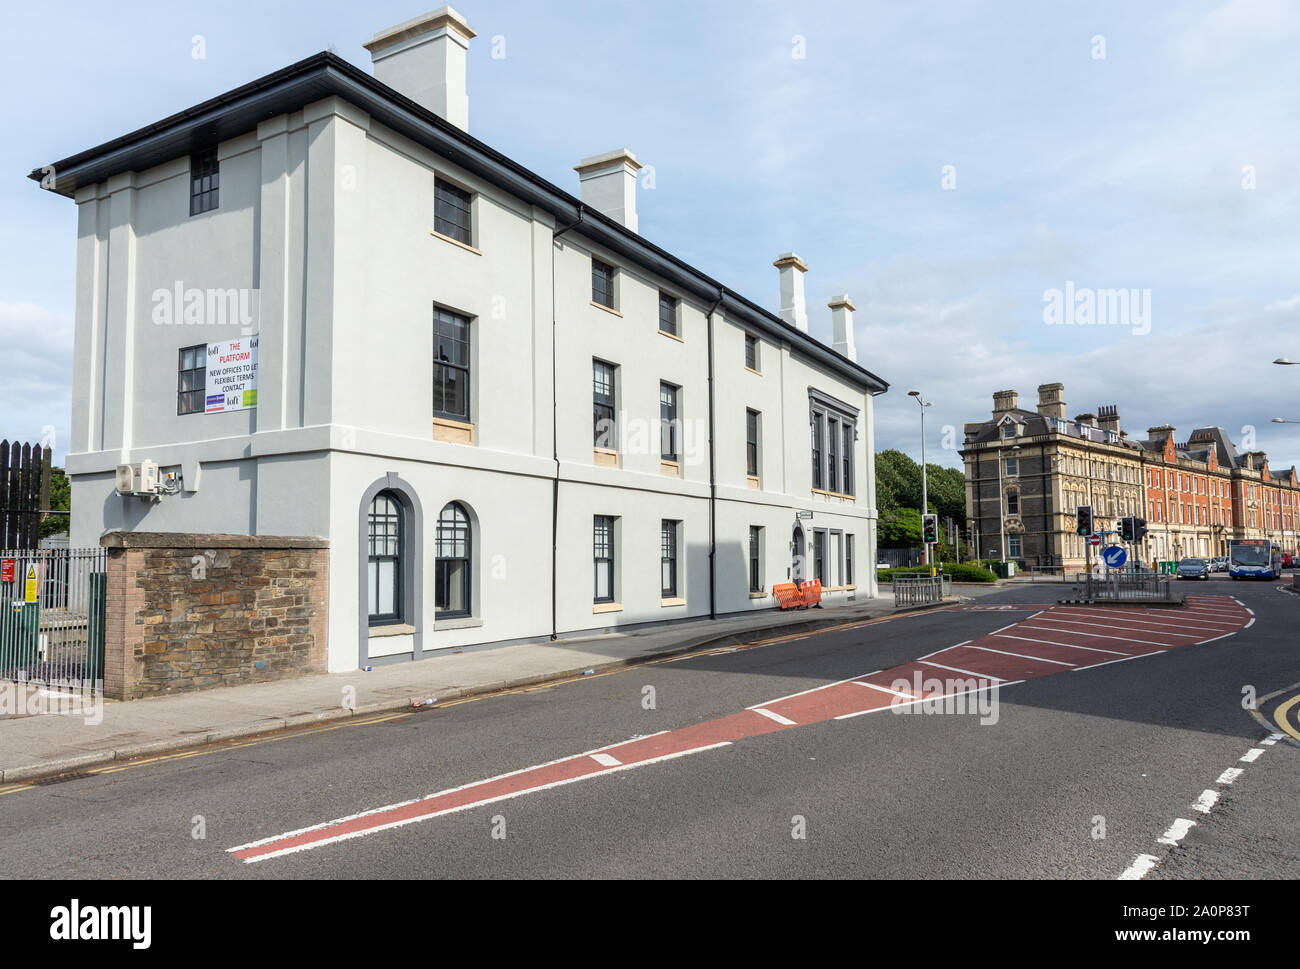 Cardiff, Wales, UK - July 21, 2019: The recently refurbished Cardiff Bay Railway Station stands on Bute Street at the terminus of the Butetown Branch Stock Photo